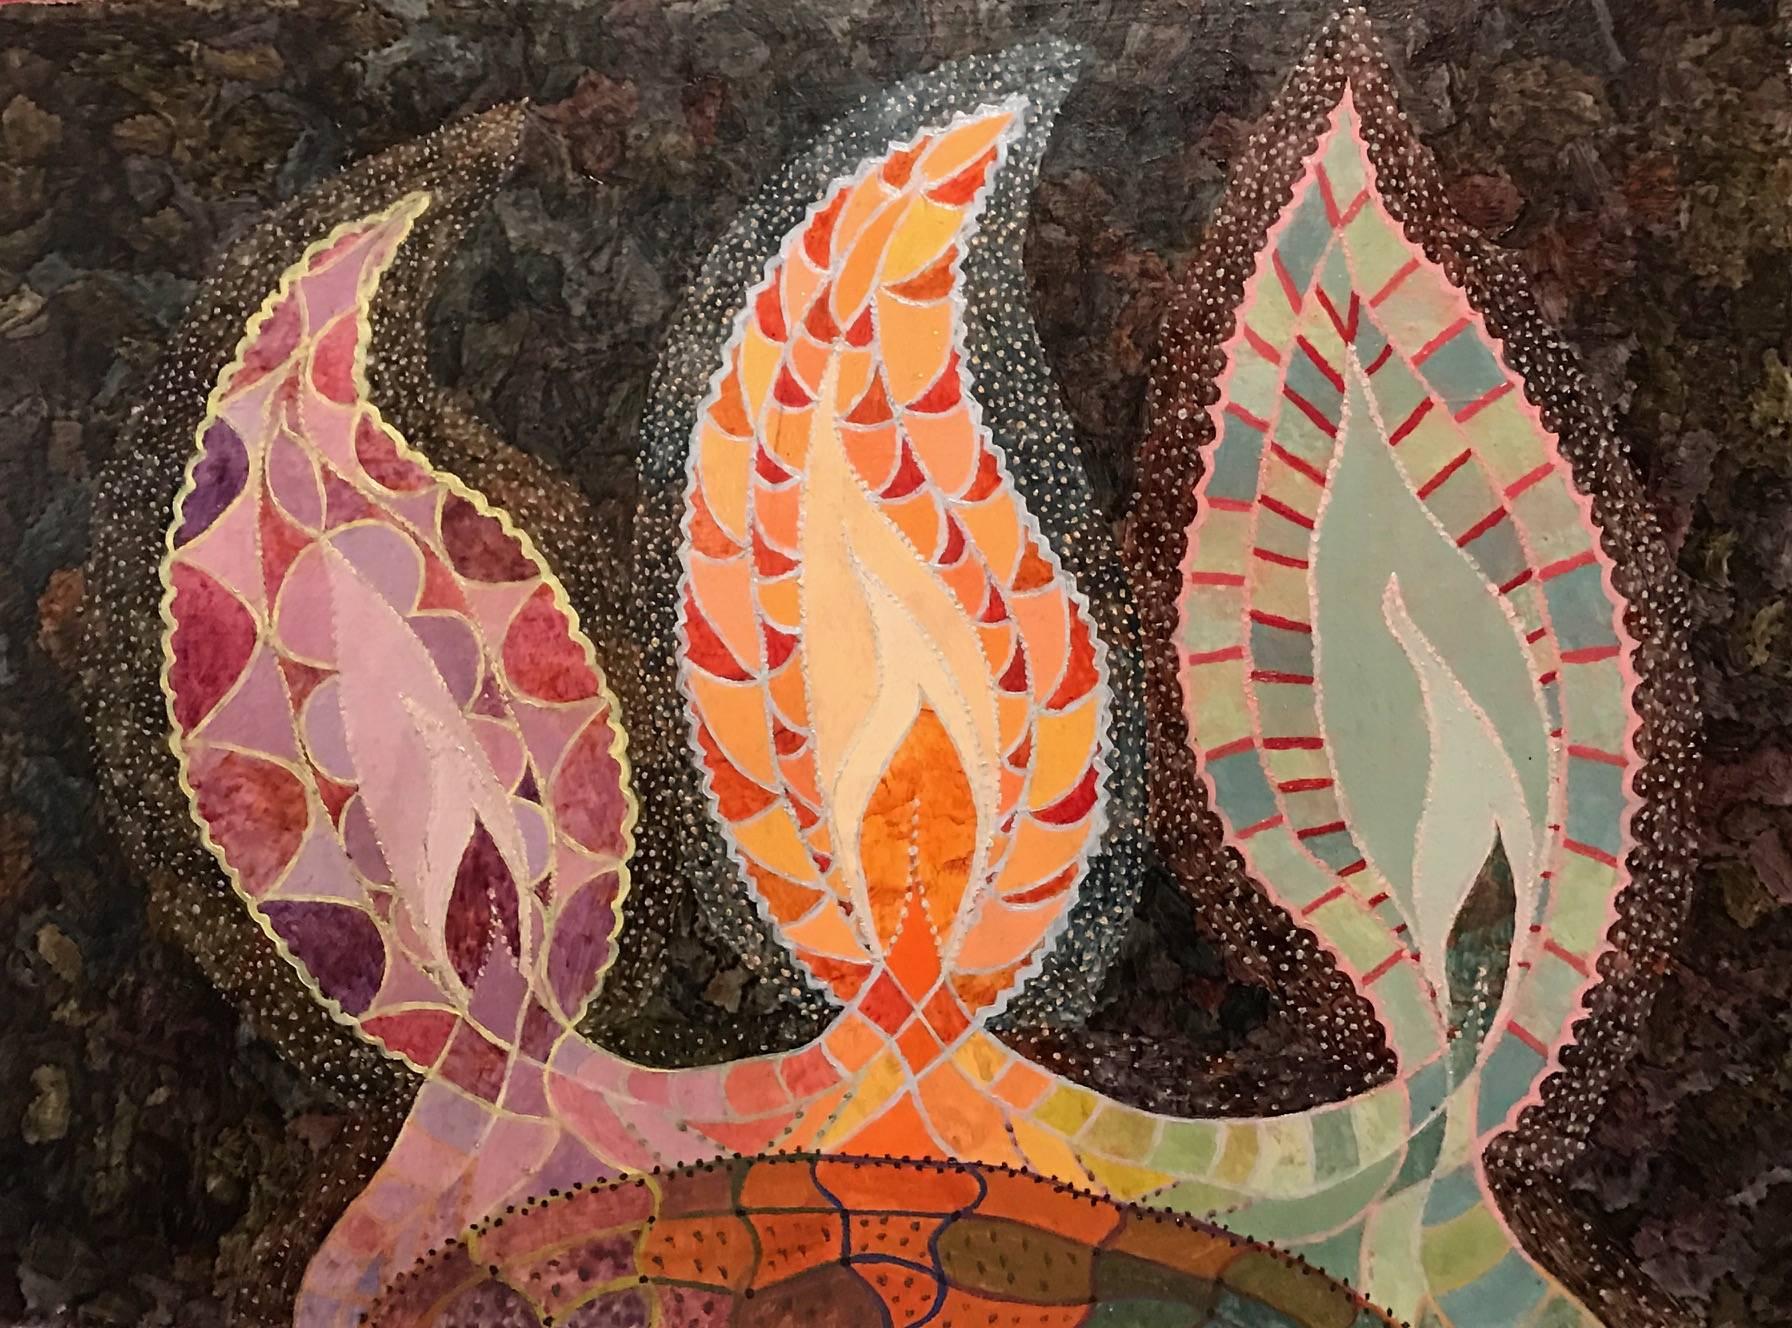 Stunning original oil painting by Elvic Steele depicting this surrealist abstract depiction of three wildly colourful flames - titled verso.

Elvic Steele is a fascinating English painter. Her works entrance the observer, drawing them into her